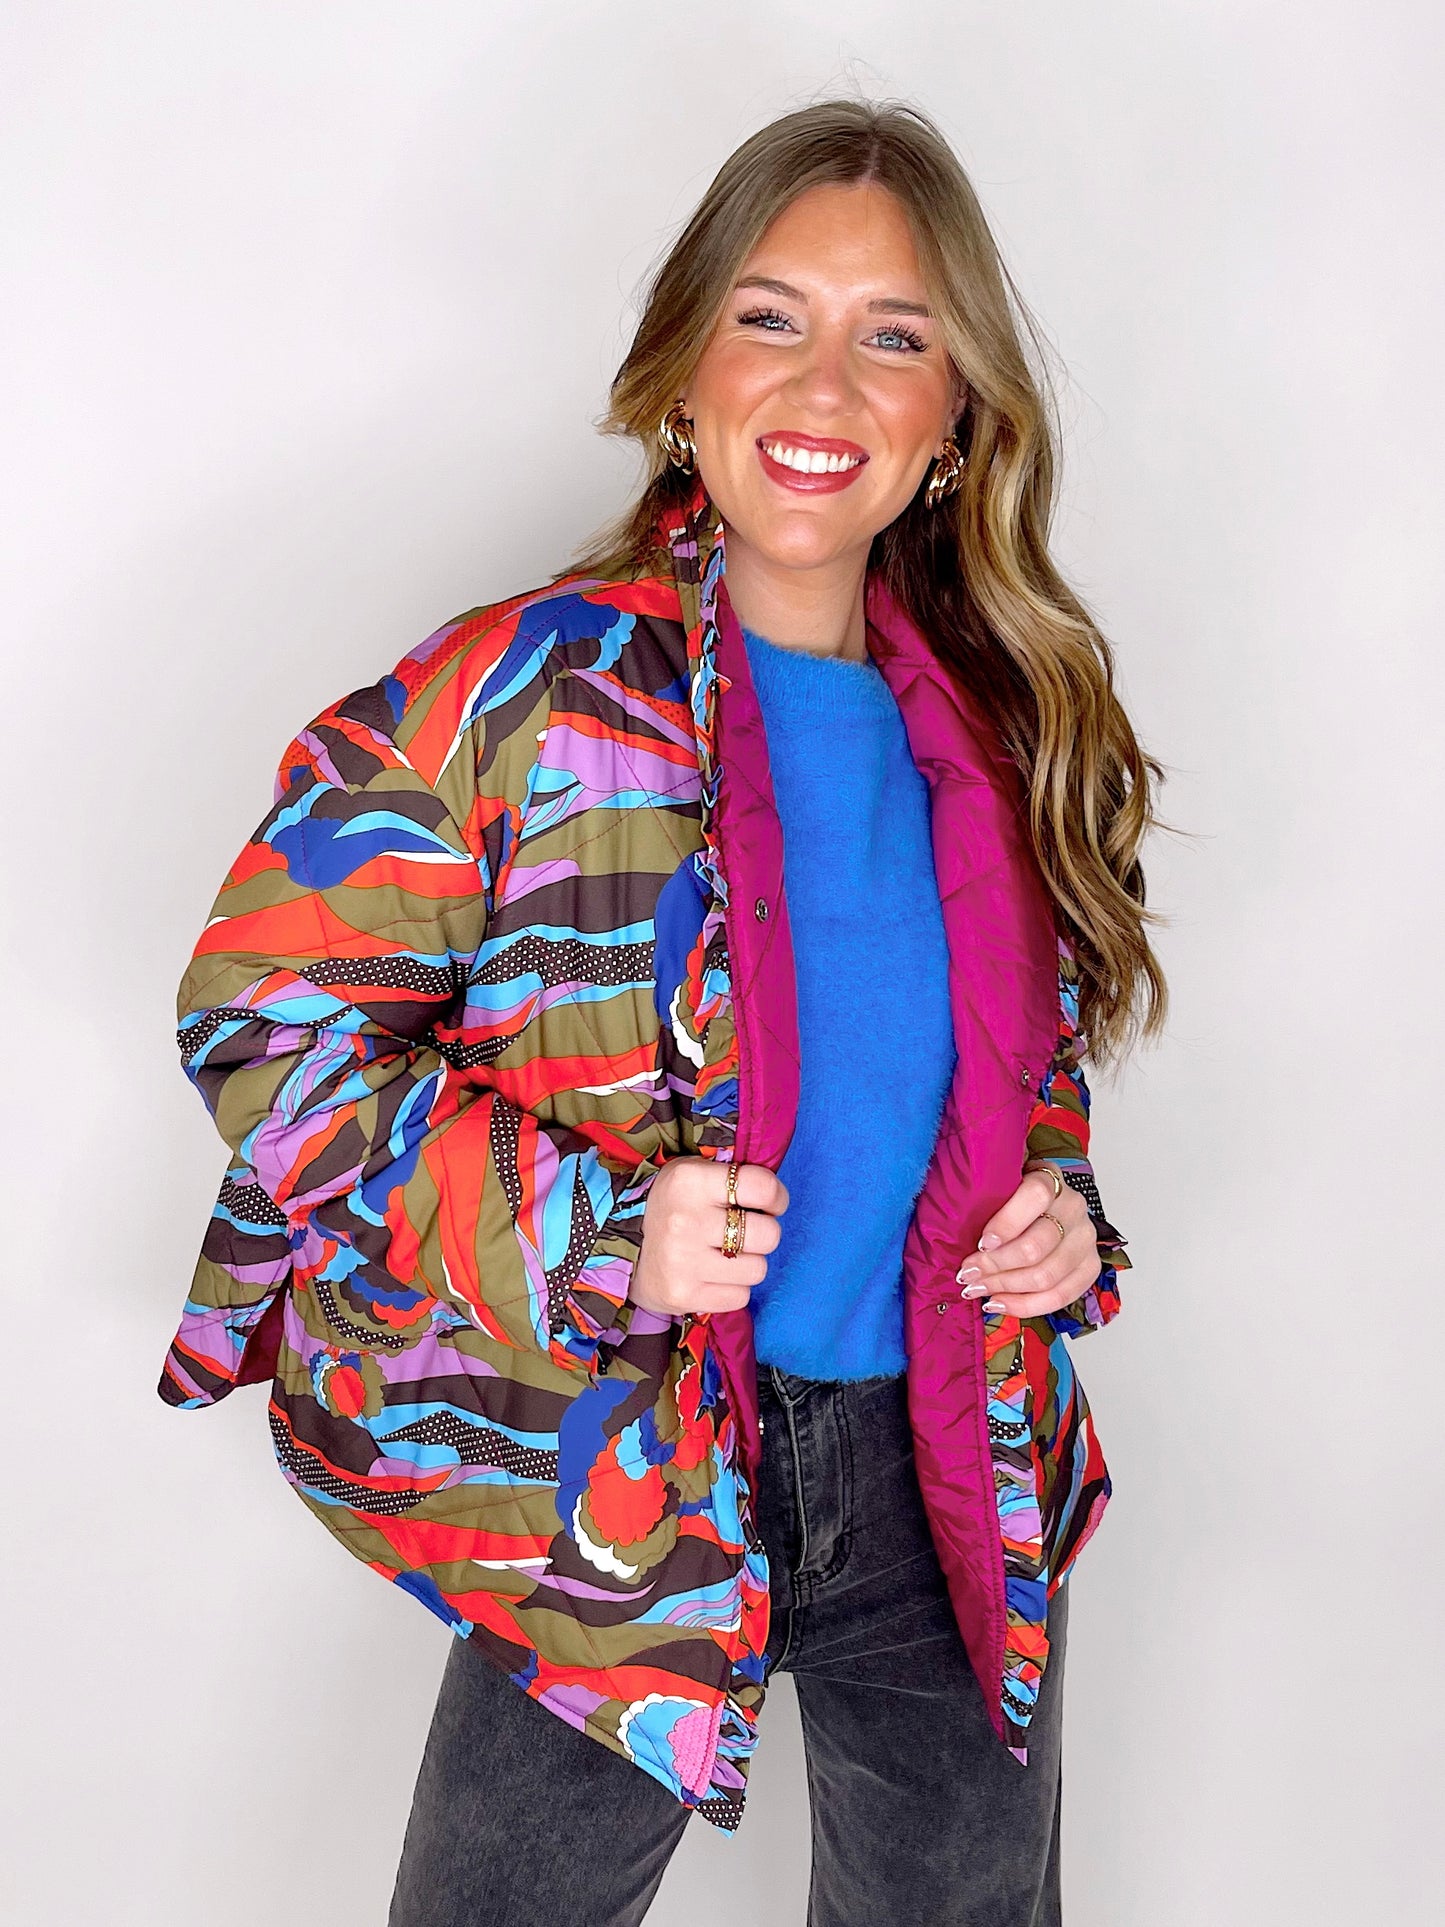 The Brantley Quilted Jacket-Jackets-Sundayup-The Village Shoppe, Women’s Fashion Boutique, Shop Online and In Store - Located in Muscle Shoals, AL.